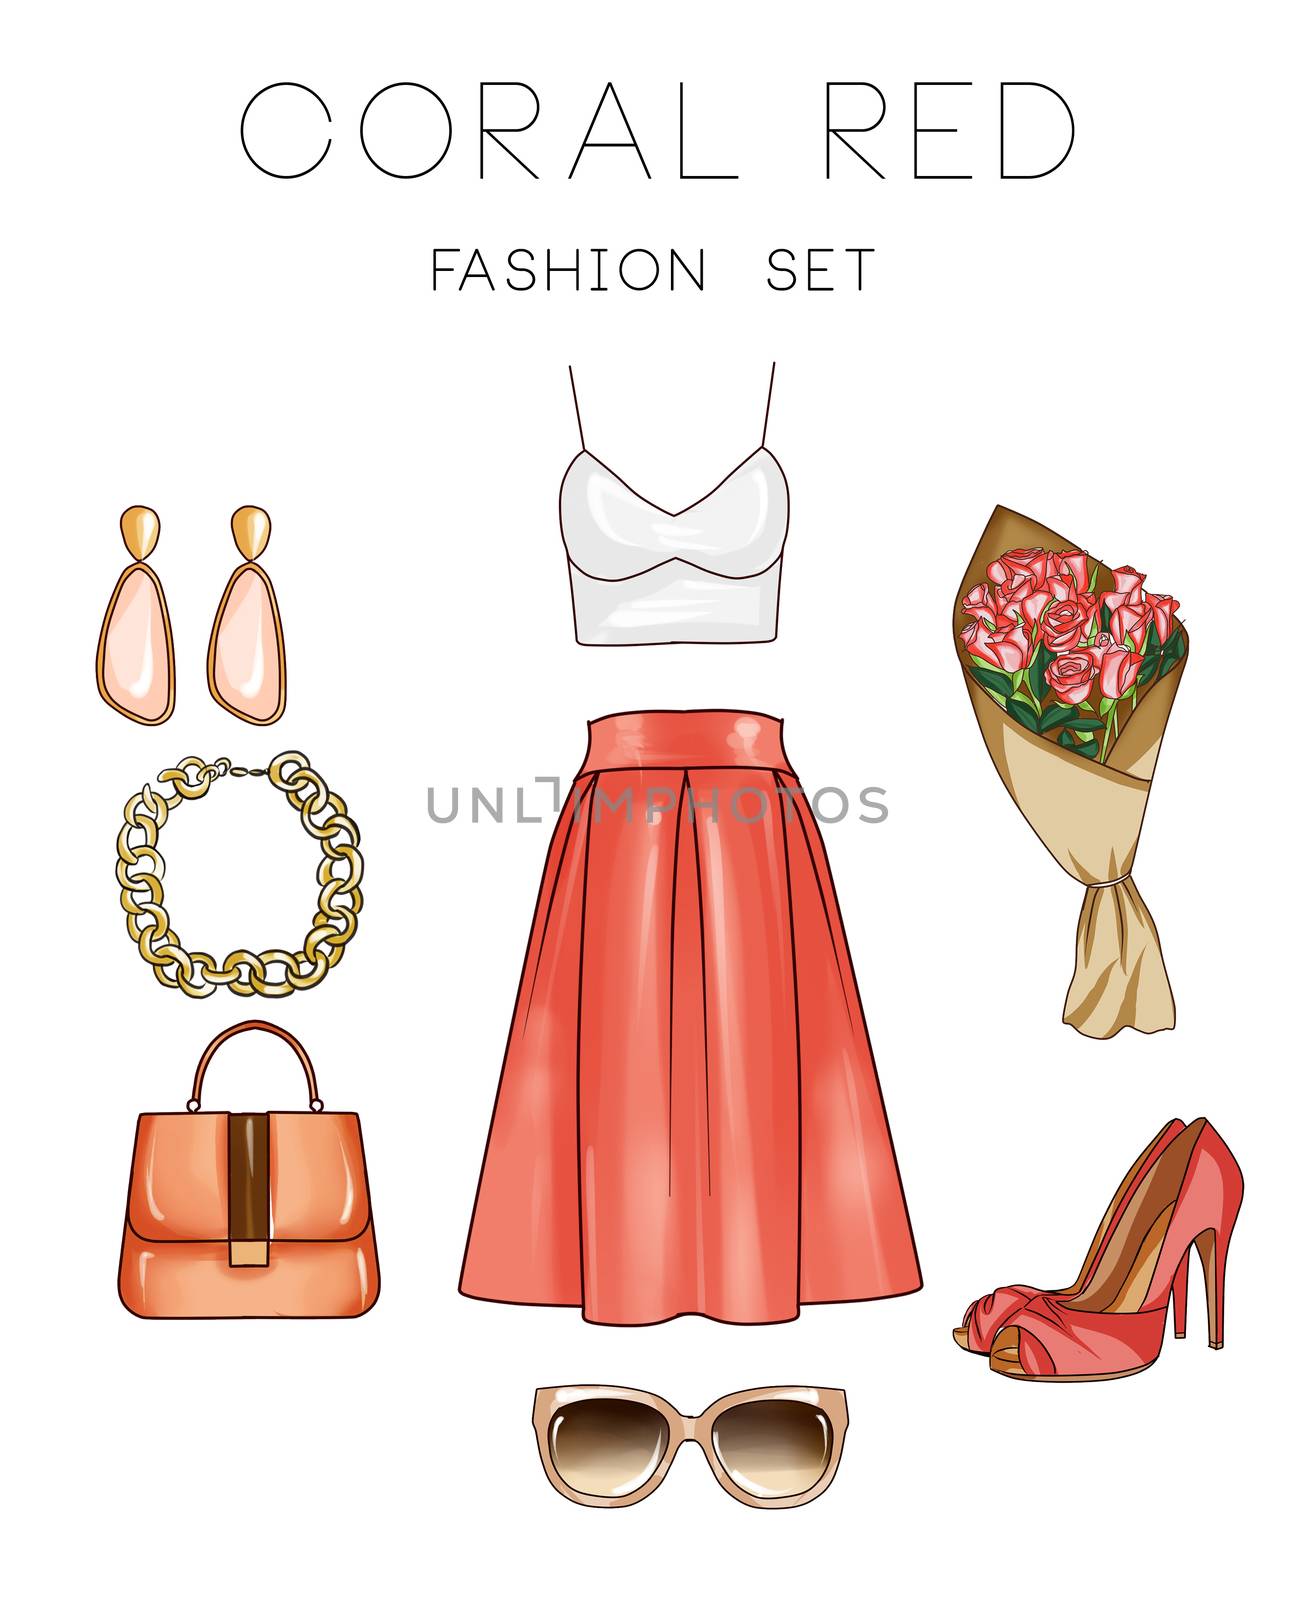 Fashion set of woman's clothes and accessories - Top, skirt, jewels, hand bag, heel shoes, sunglasses, flowers